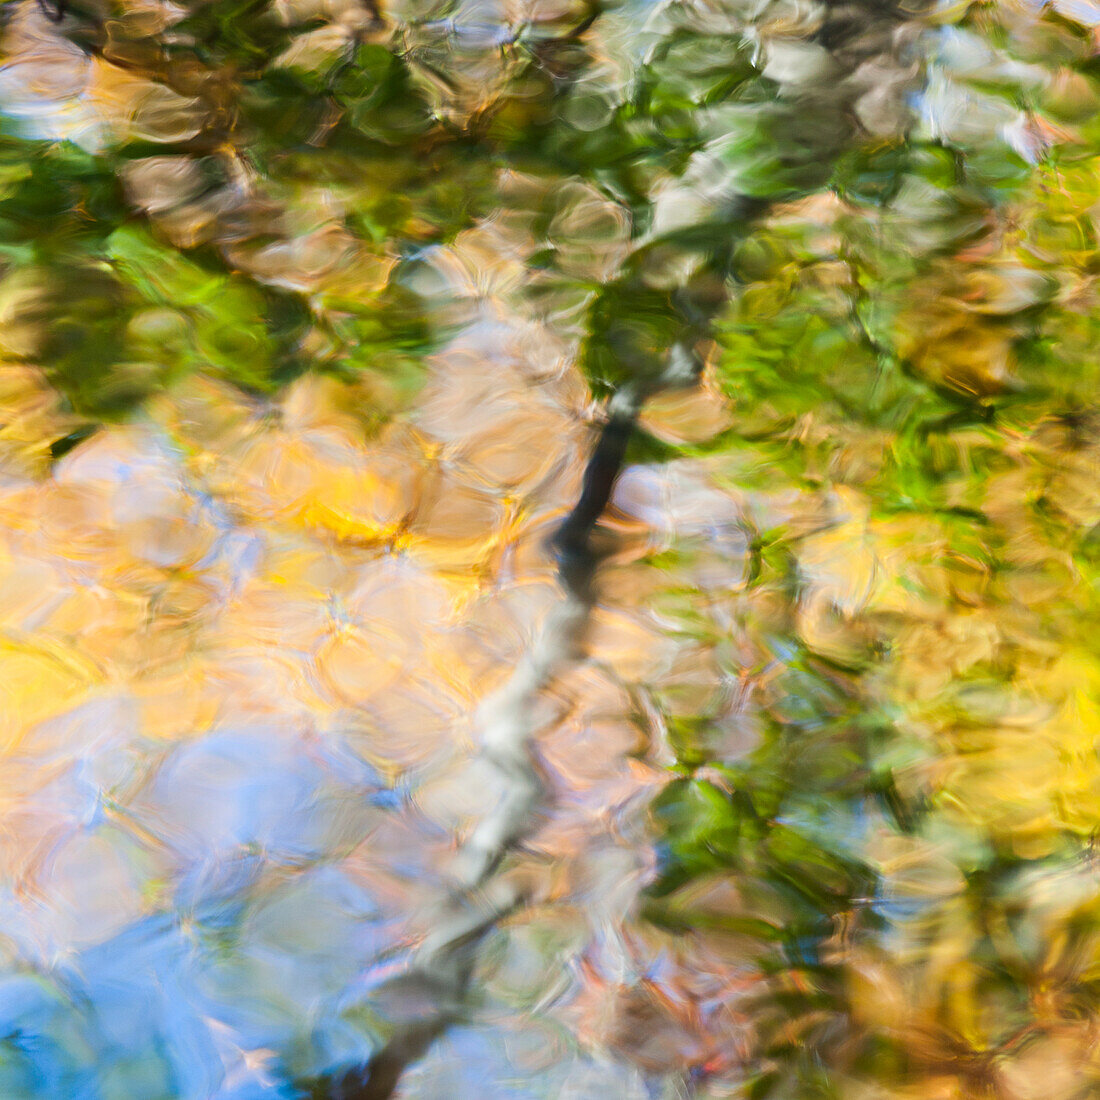 Fall colors reflect in the rippled waters of a pond, looking like a painting.